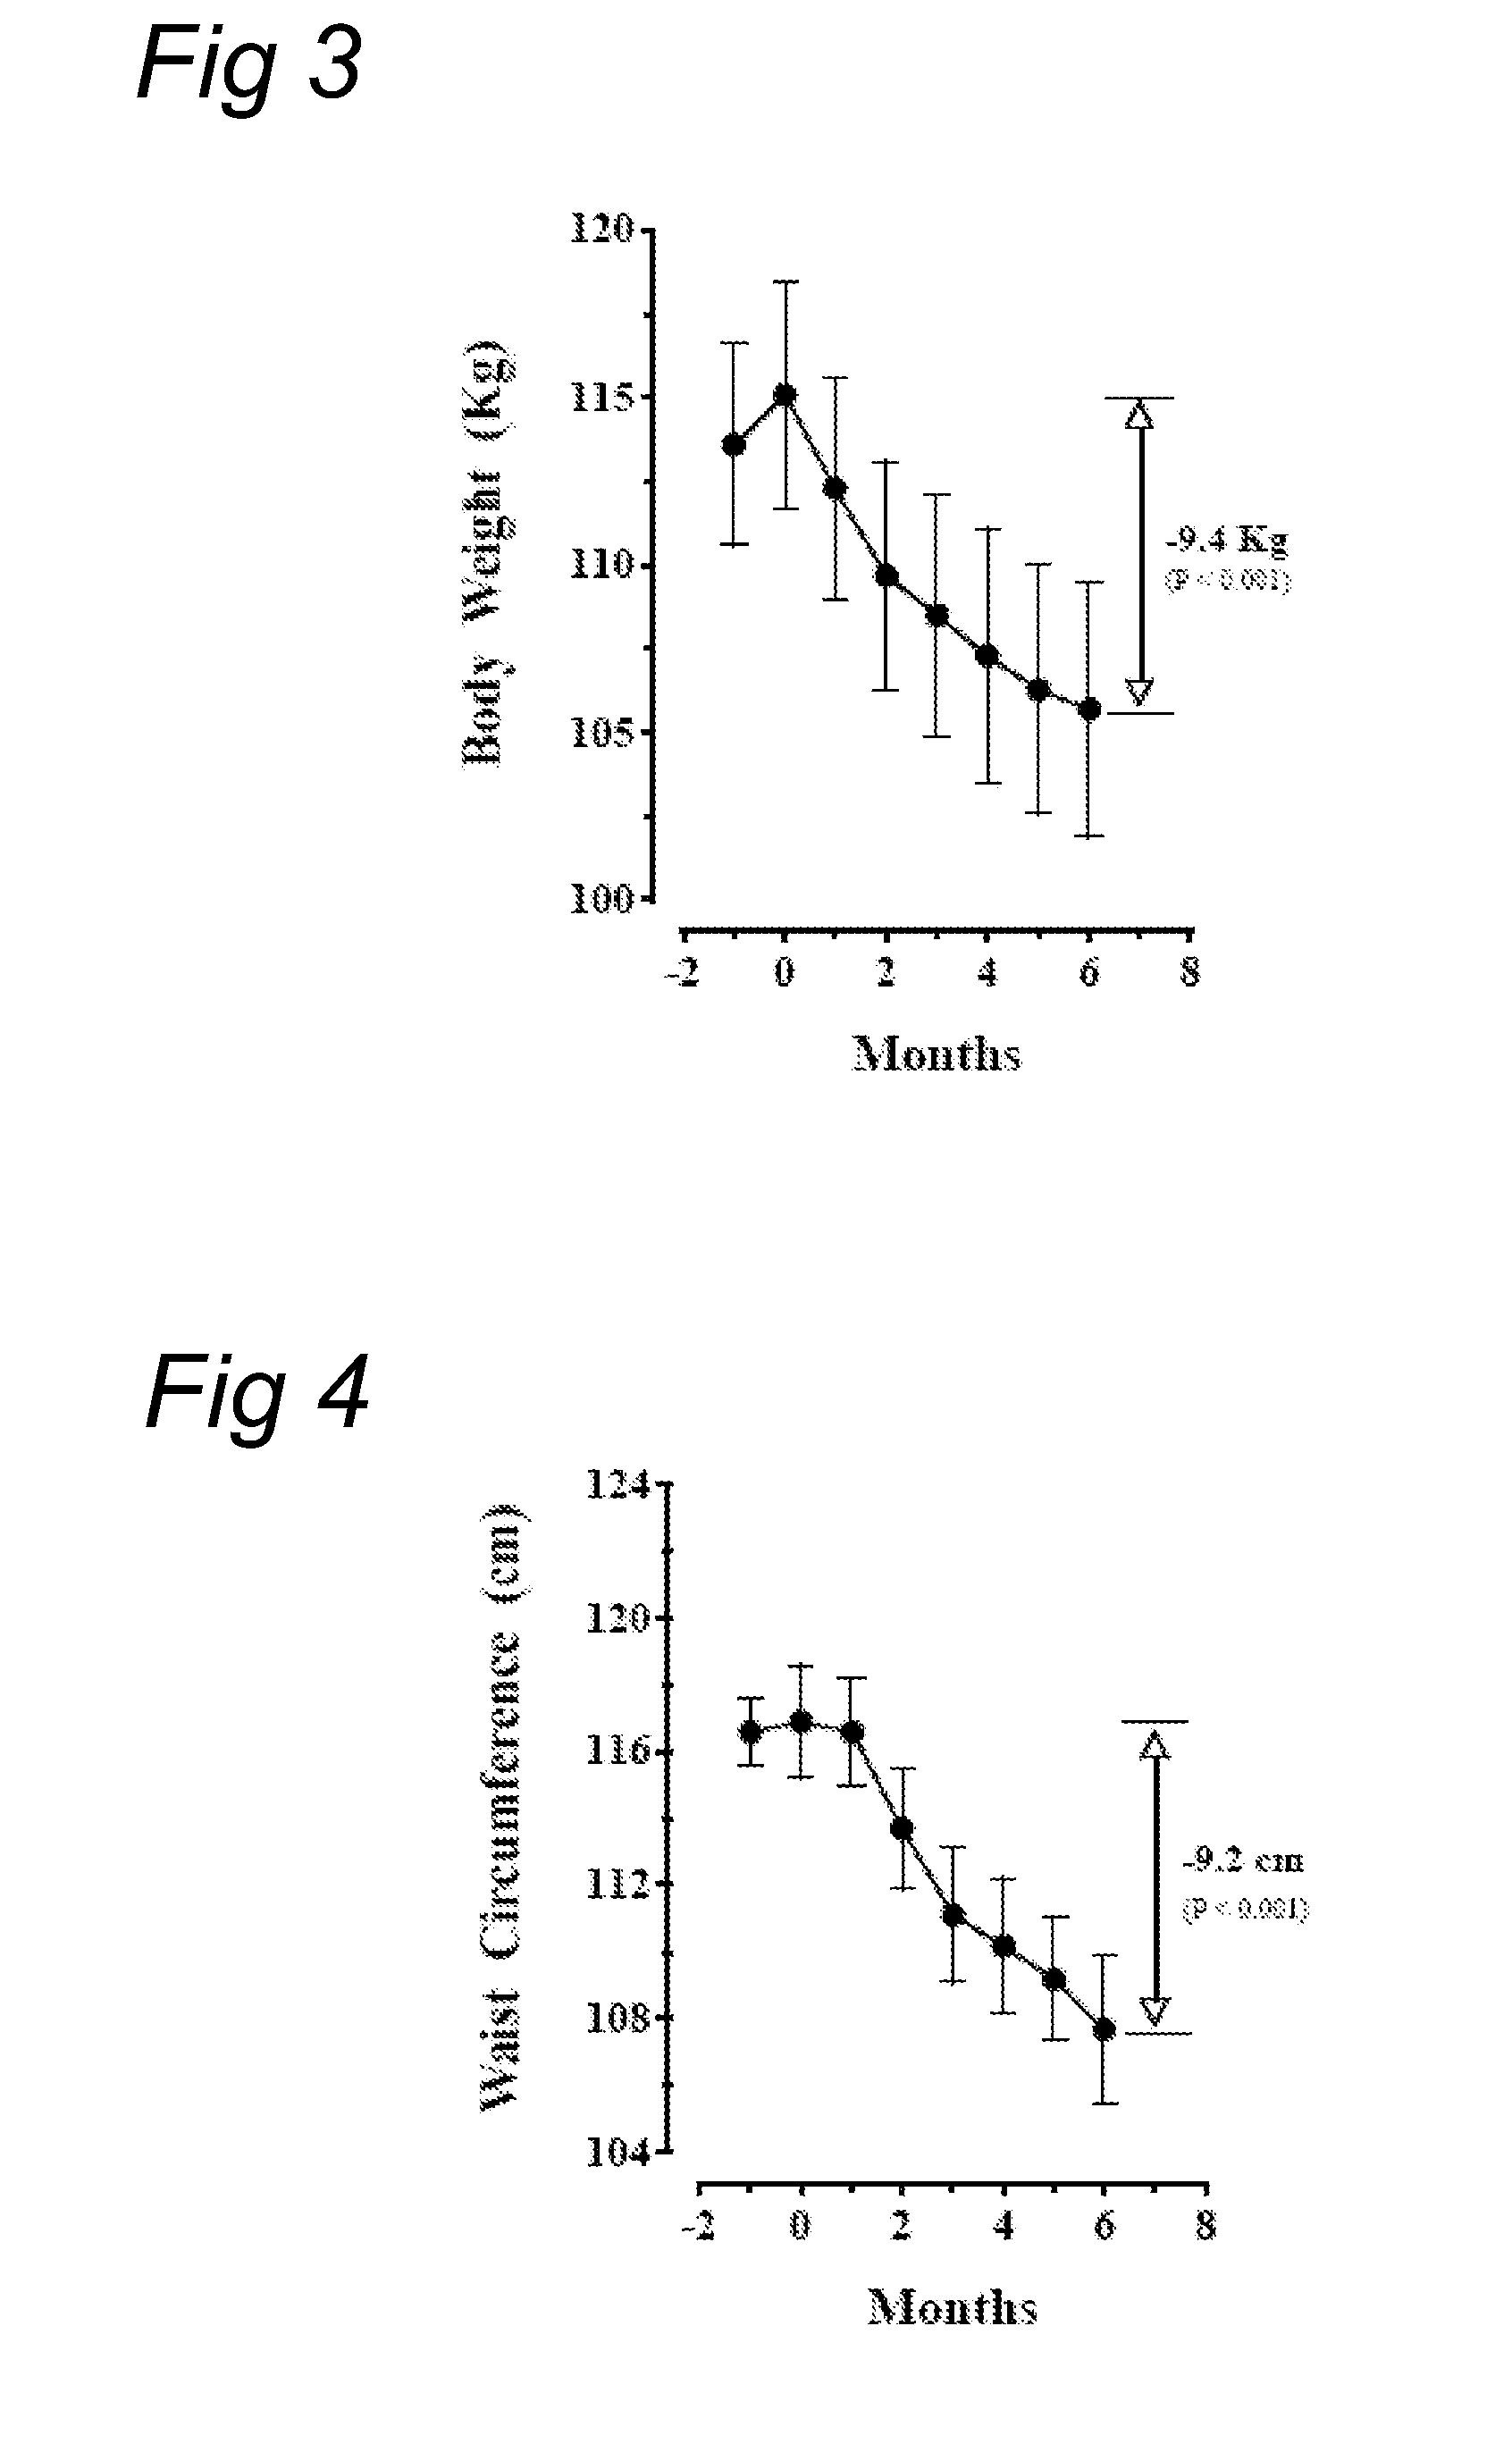 Use of diazoxide for suppressing the plasma insulin level in a mammal